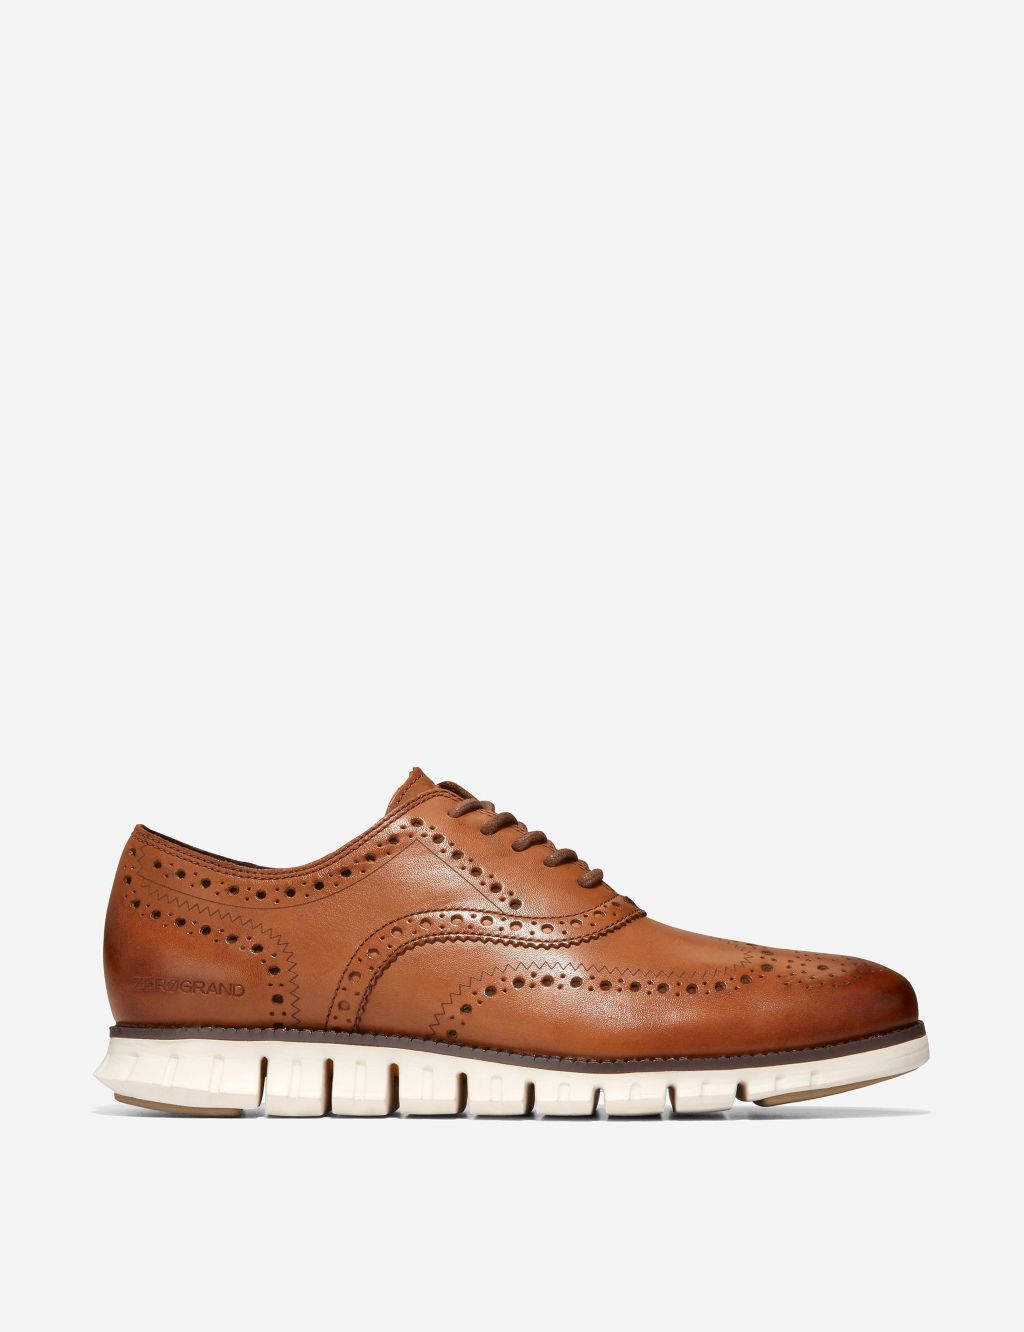 Zerogrand Wingtip Leather Oxford Shoes | Cole Haan | M&S